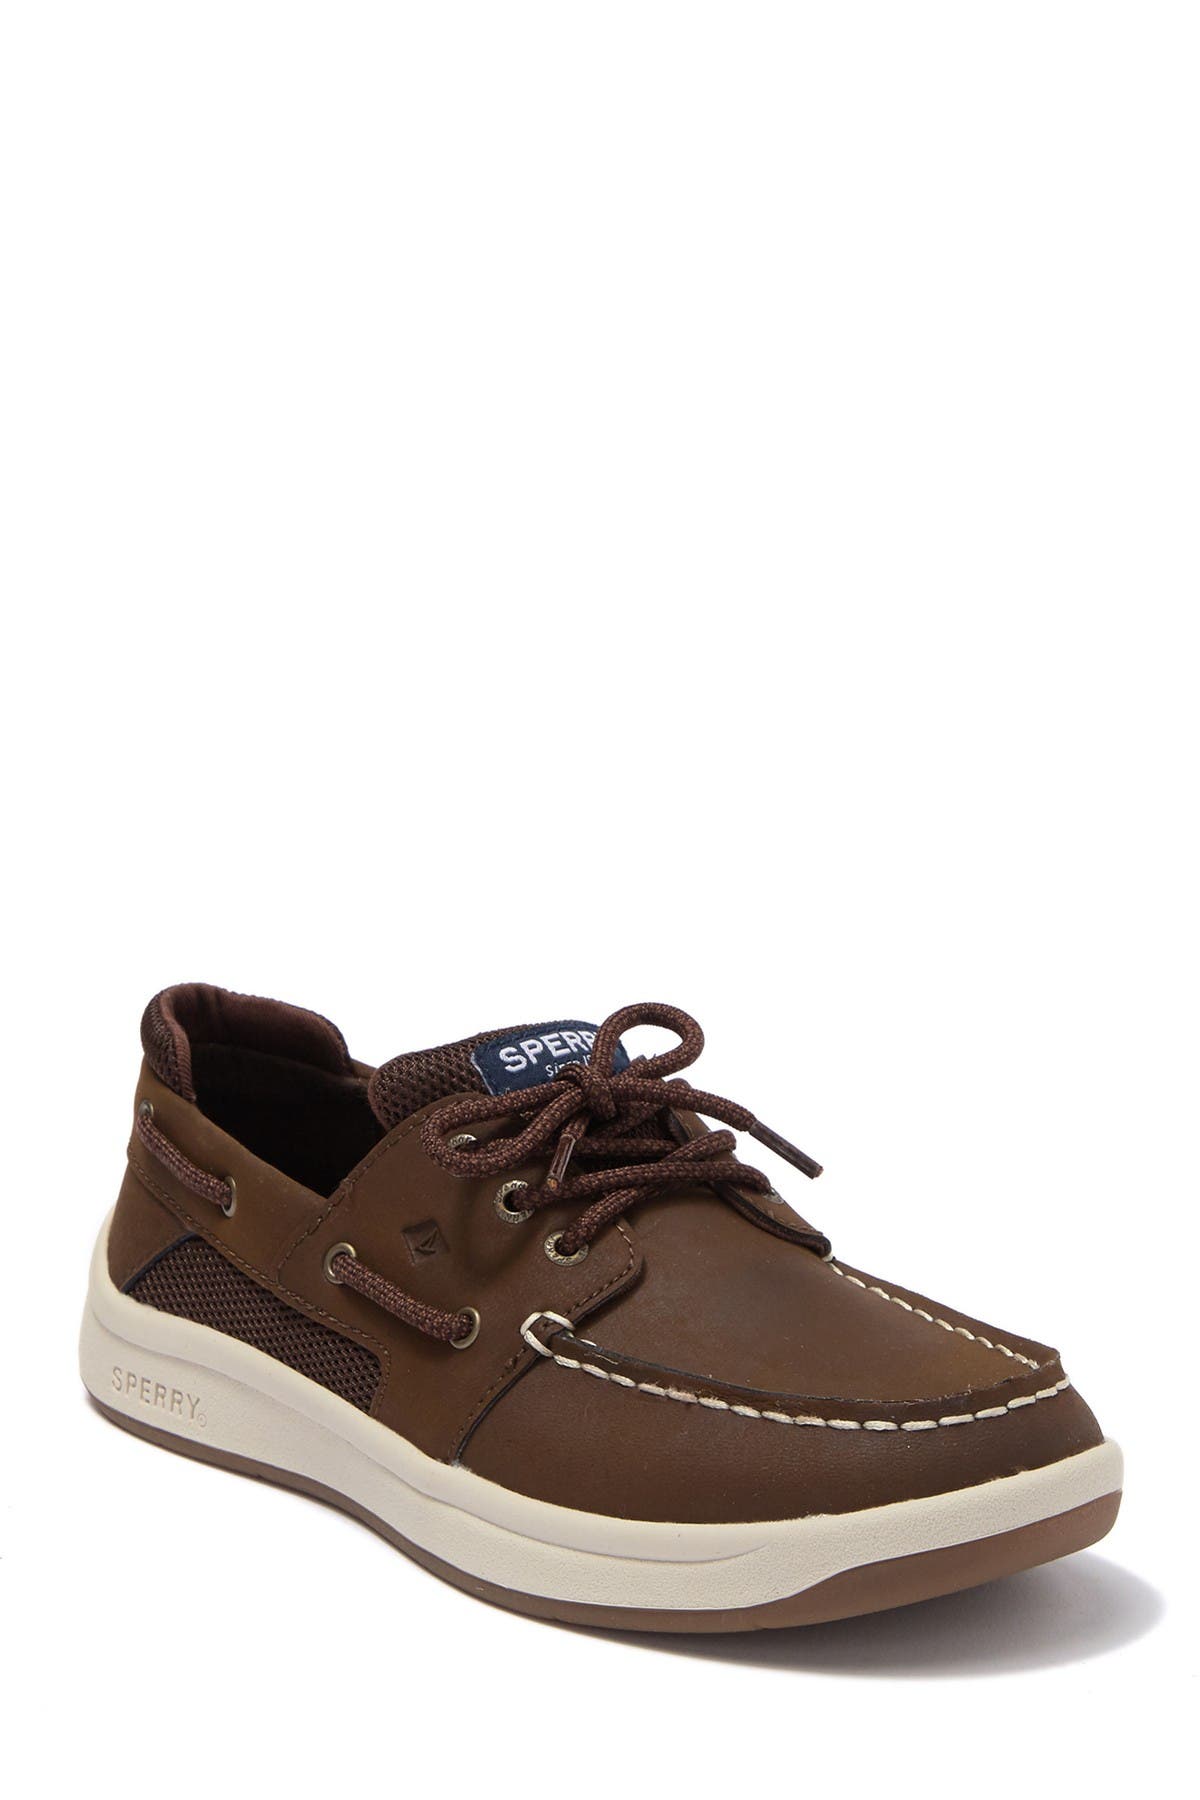 Sperry | Convoy Leather Boat Shoe 